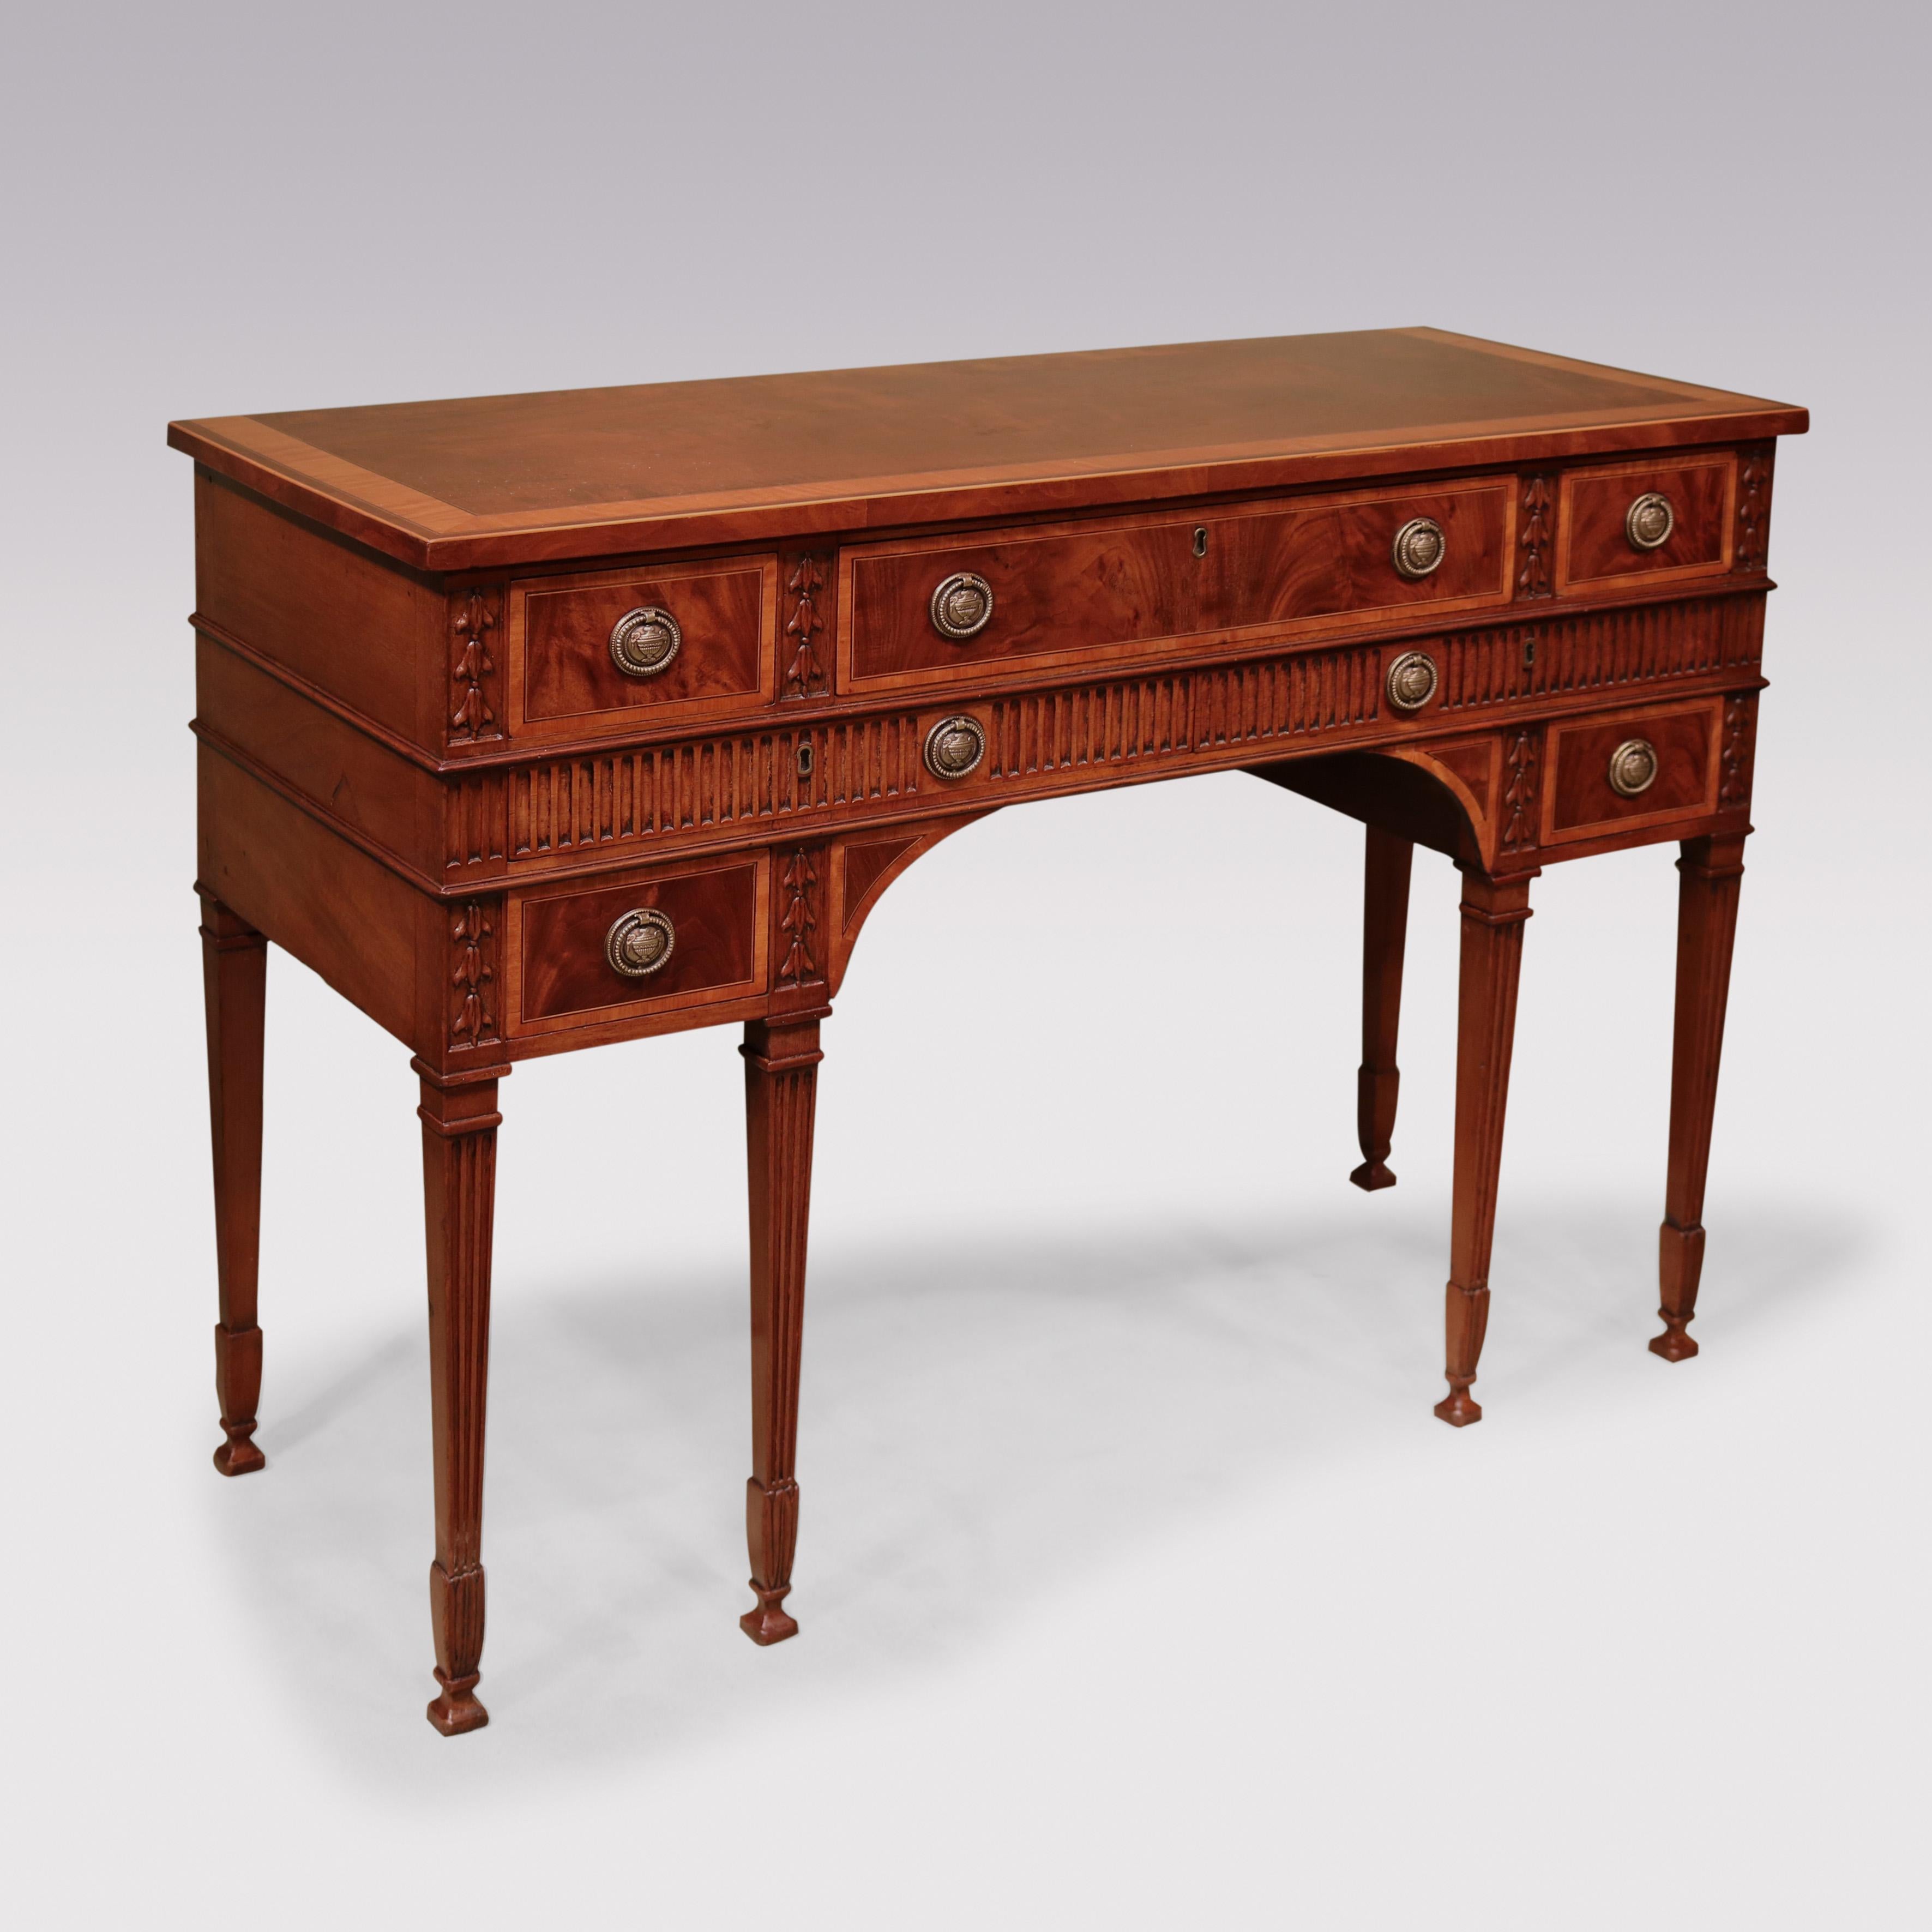 An unusual late 18th Century mahogany Side Table, having satinwood crossbanded top above satinwood banded drawers flanked by carved husk decoration & unusual, fluted frieze with 2 further concealed drawers, supported on fluted tapering legs with